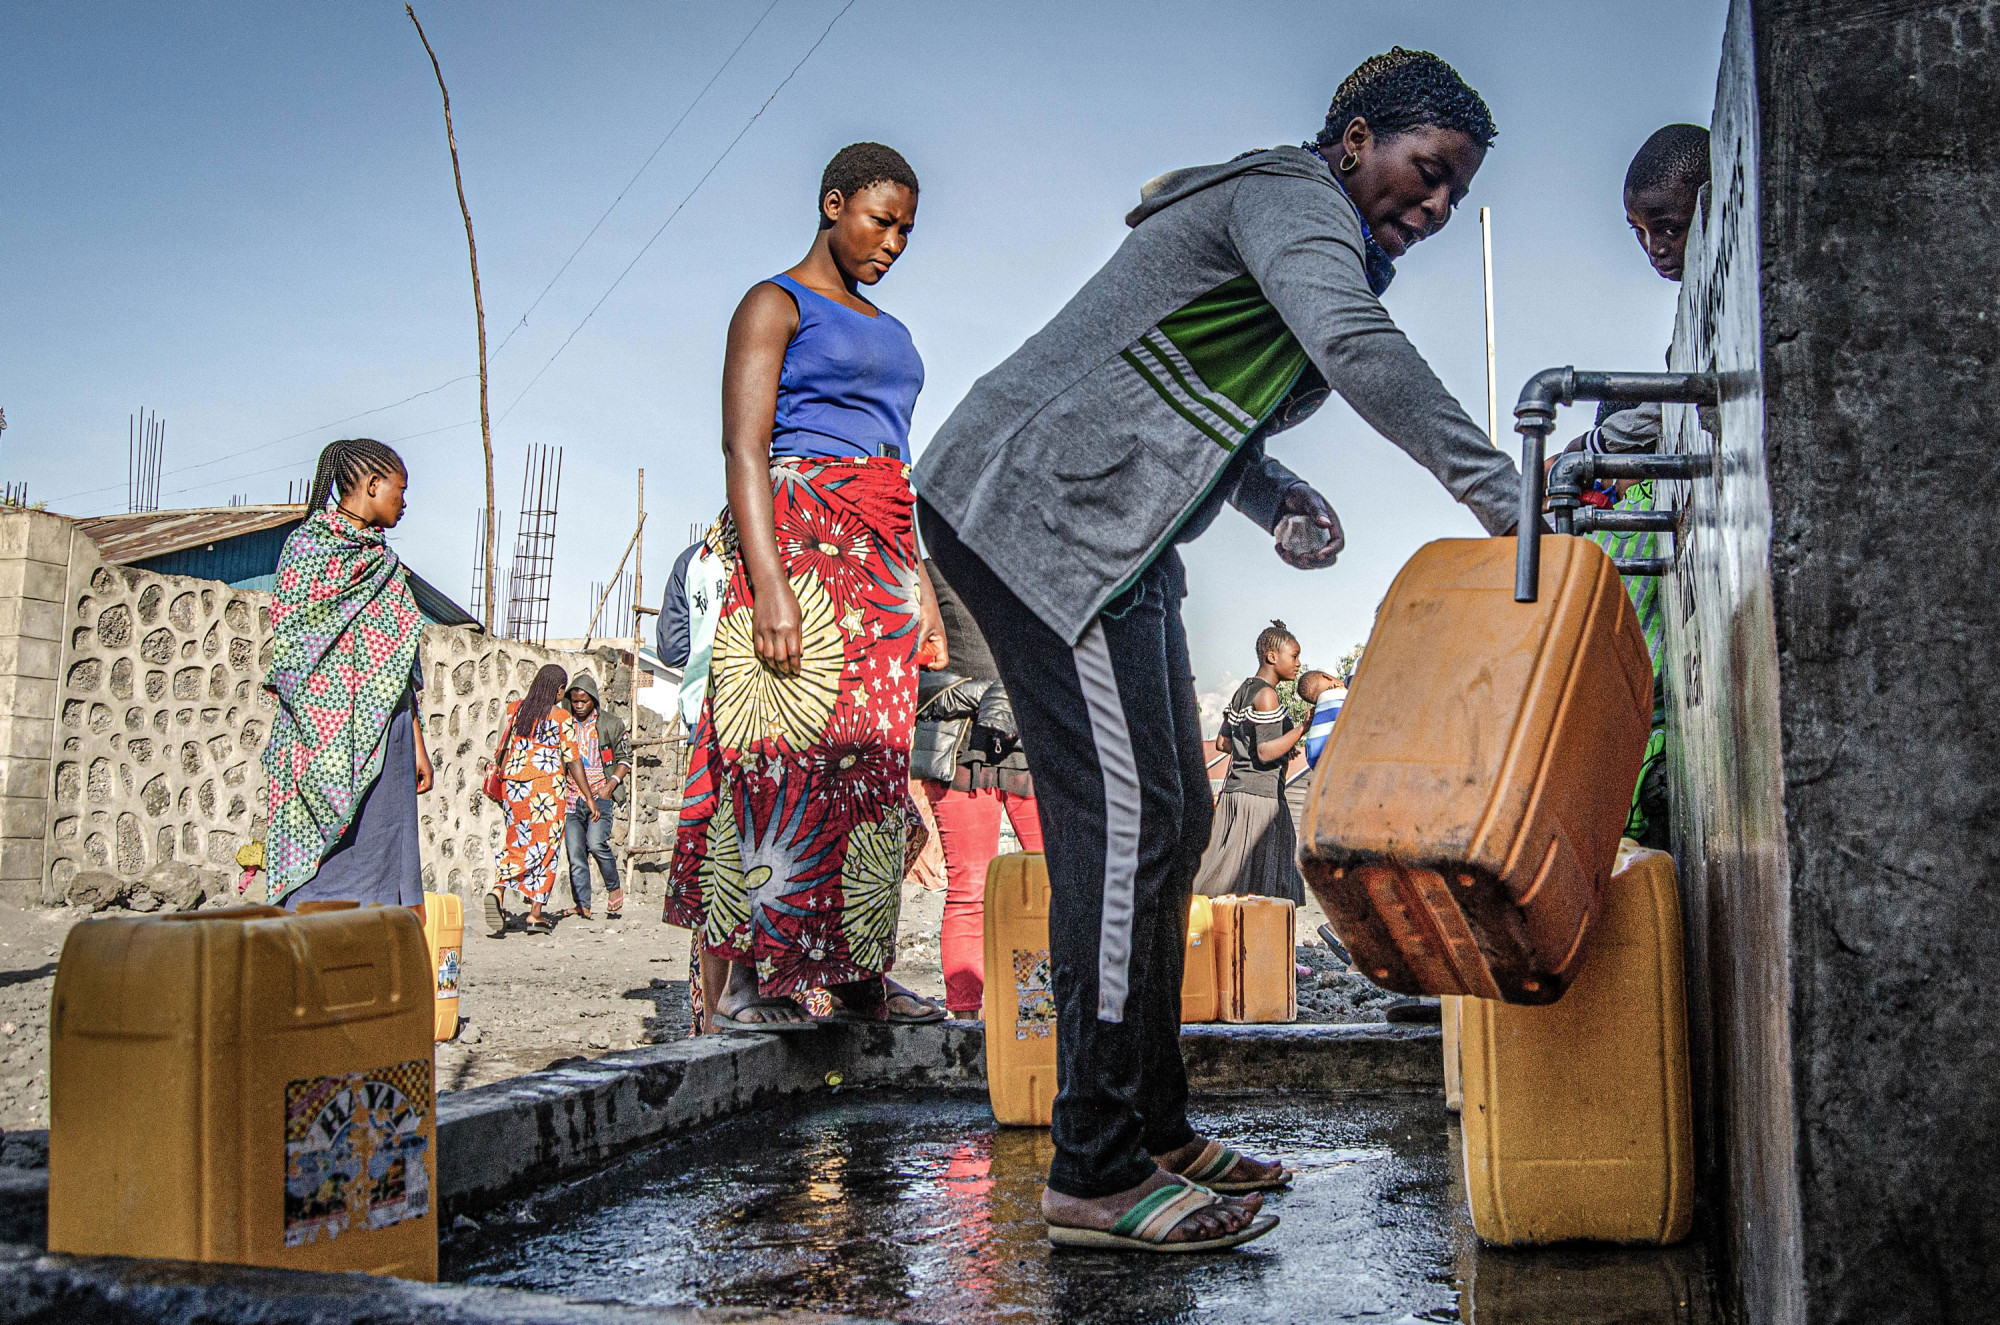 Goma, Democratic Republic of Congo, May 2020. A woman fills a water container in Goma, the capital of eastern Congo’s North Kivu Province last month. © Arlette Bashizi for Fondation Carmignac